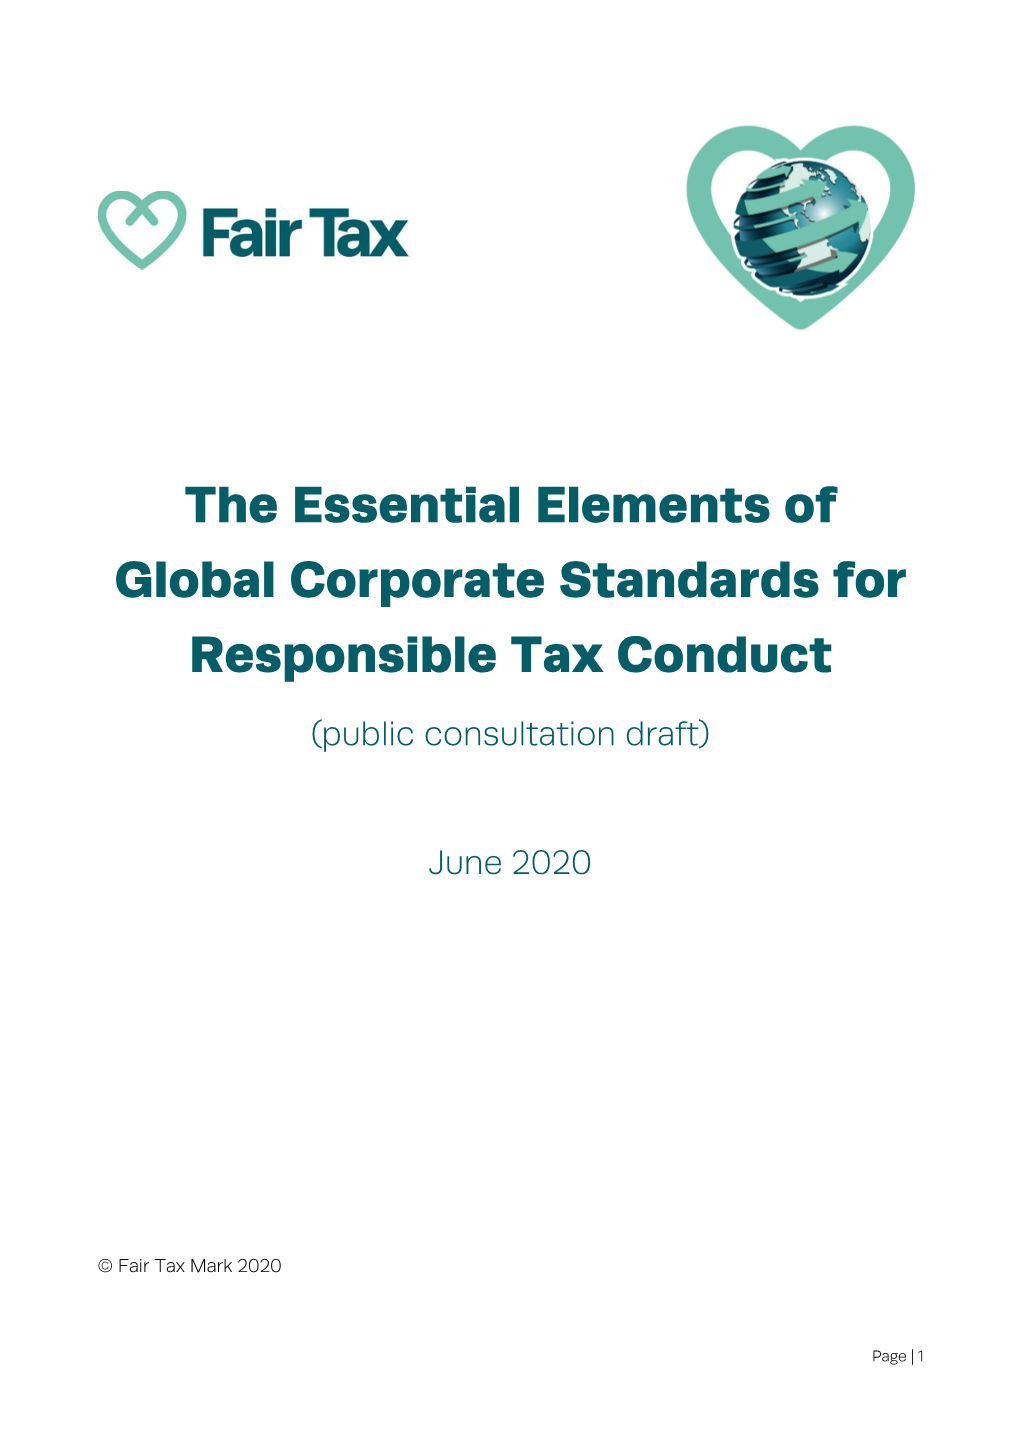 The Essential Elements of Global Corporate Standards for Responsible Tax Conduct